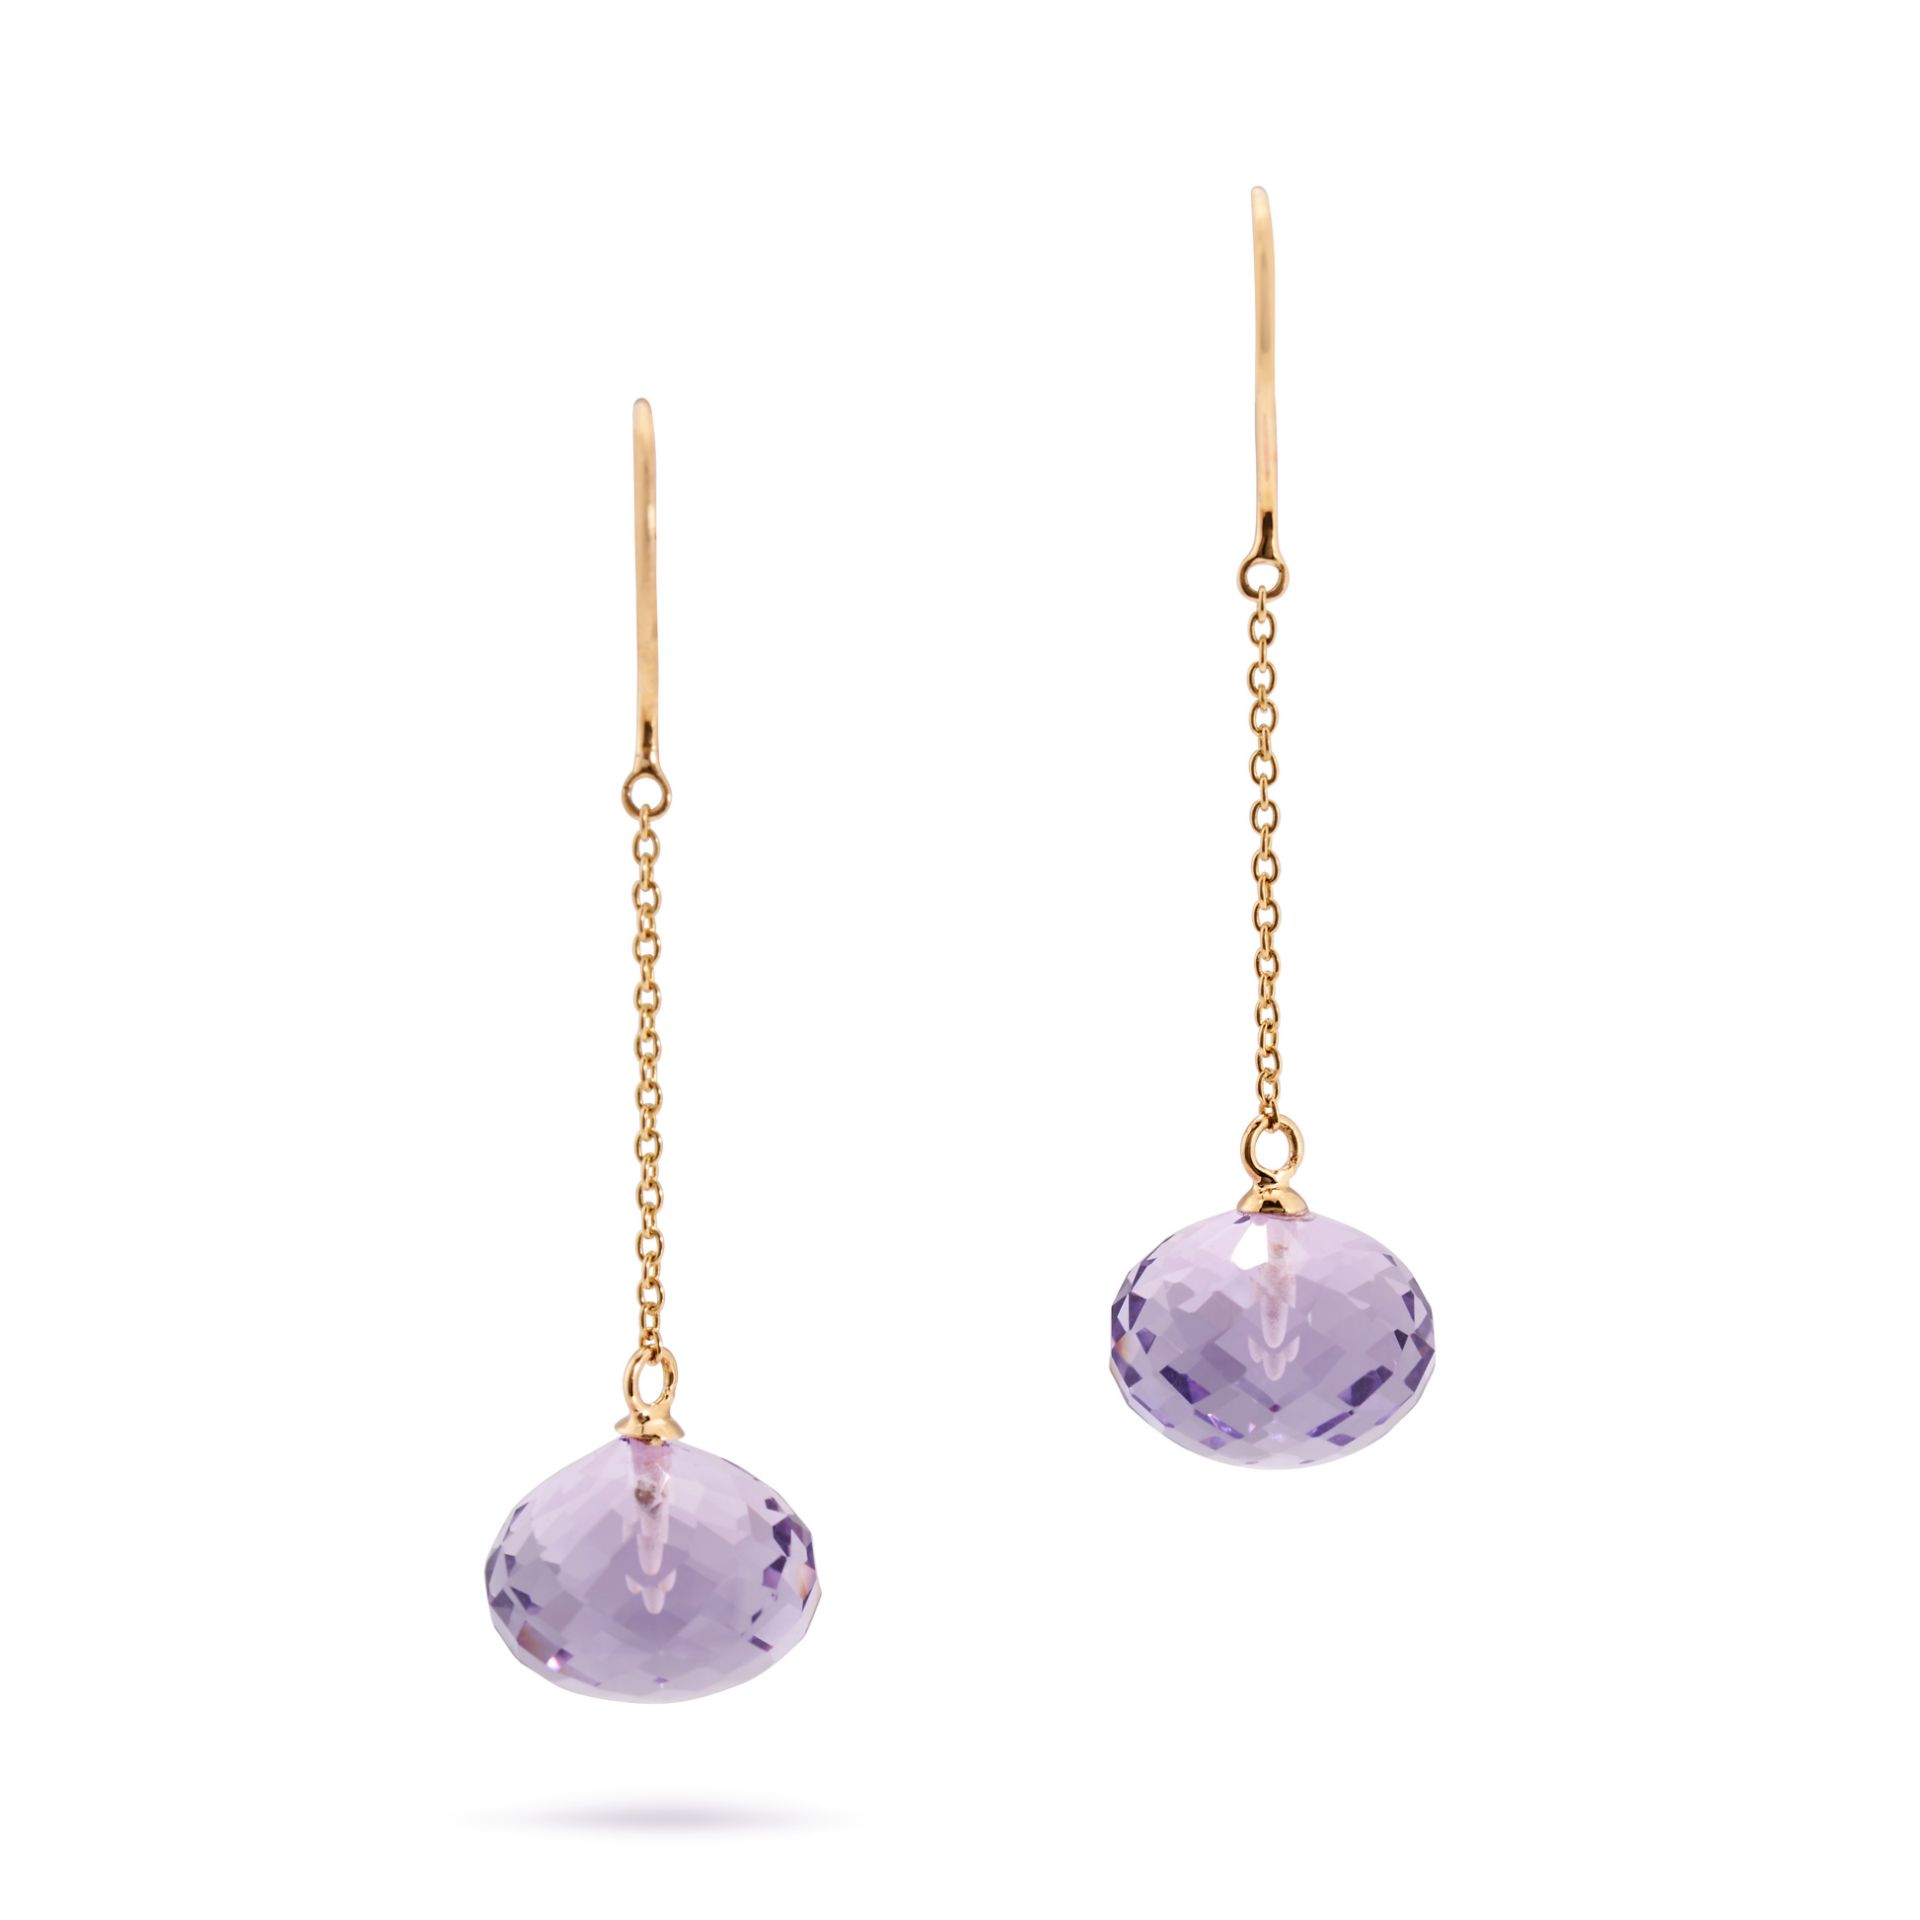 A PAIR OF AMETHYST DROP EARRINGS in 18ct yellow gold, each suspending a briolette cut amethyst dr...